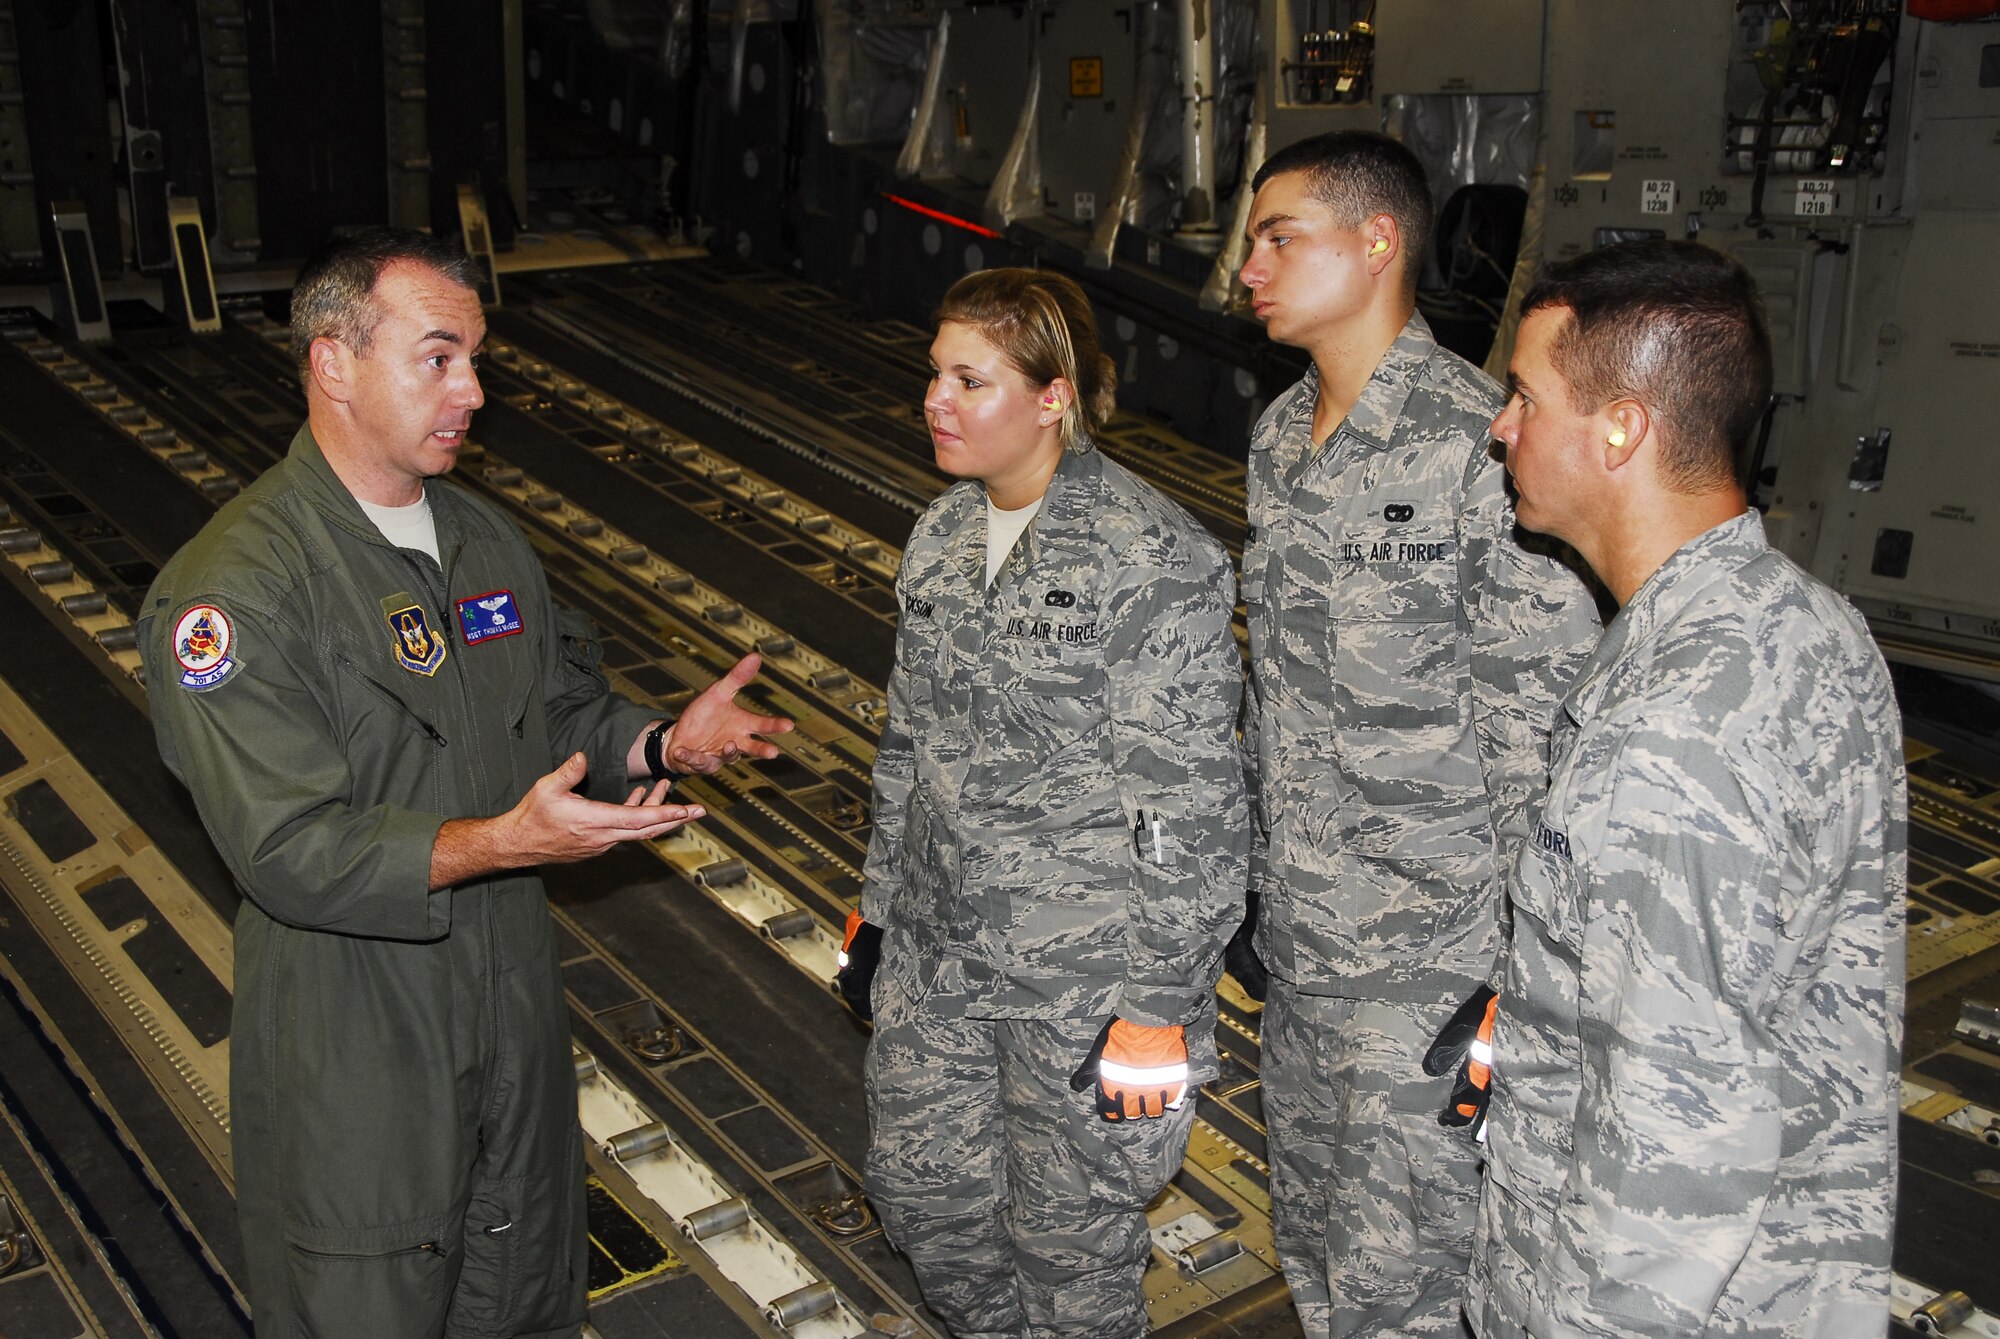 Basic Airmen Airmen Melissa Erickson, Tyler Cancel and Heath Ezelle of the 908th Airlift Wing listen as Master Sgt. Thomas McGee, a loadmaster with the 315th Airlift Wing, describes the challenges of the c-17 Globemaster III. The three Airmen, recently graduated from tech school, had just finished helping load the aircraft with five pallets of humanitarian cargo, their first real-world operation. (Air Force photo by Gene H. Hughes)